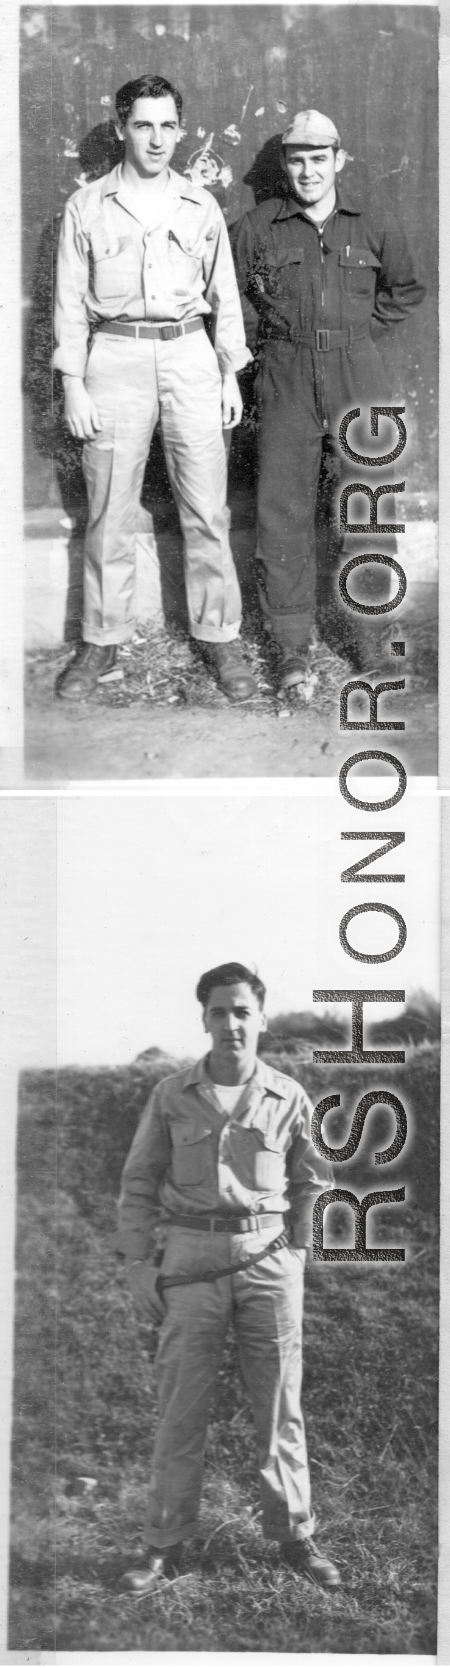 Flyers of the 24th Mapping Squadron out and about, likely at Chanyi (Zhanyi), Yunnan, China.  During WWII.